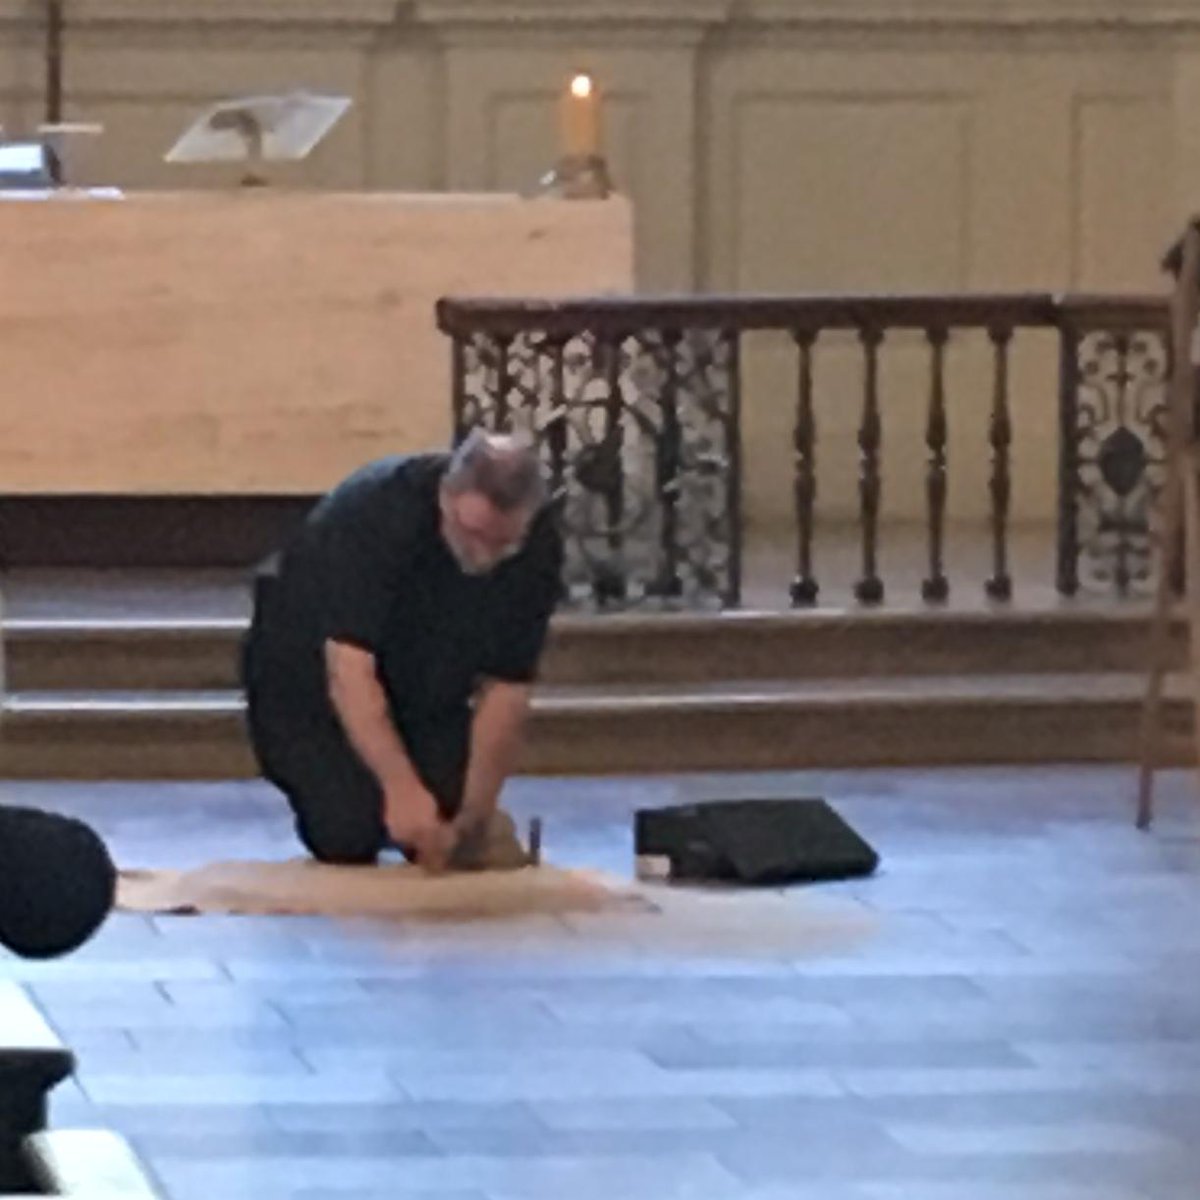 Sorry that I didn't tweet much about  @smitf_london today. Let me leave you with a photo of the Vicar acting oddly in church.